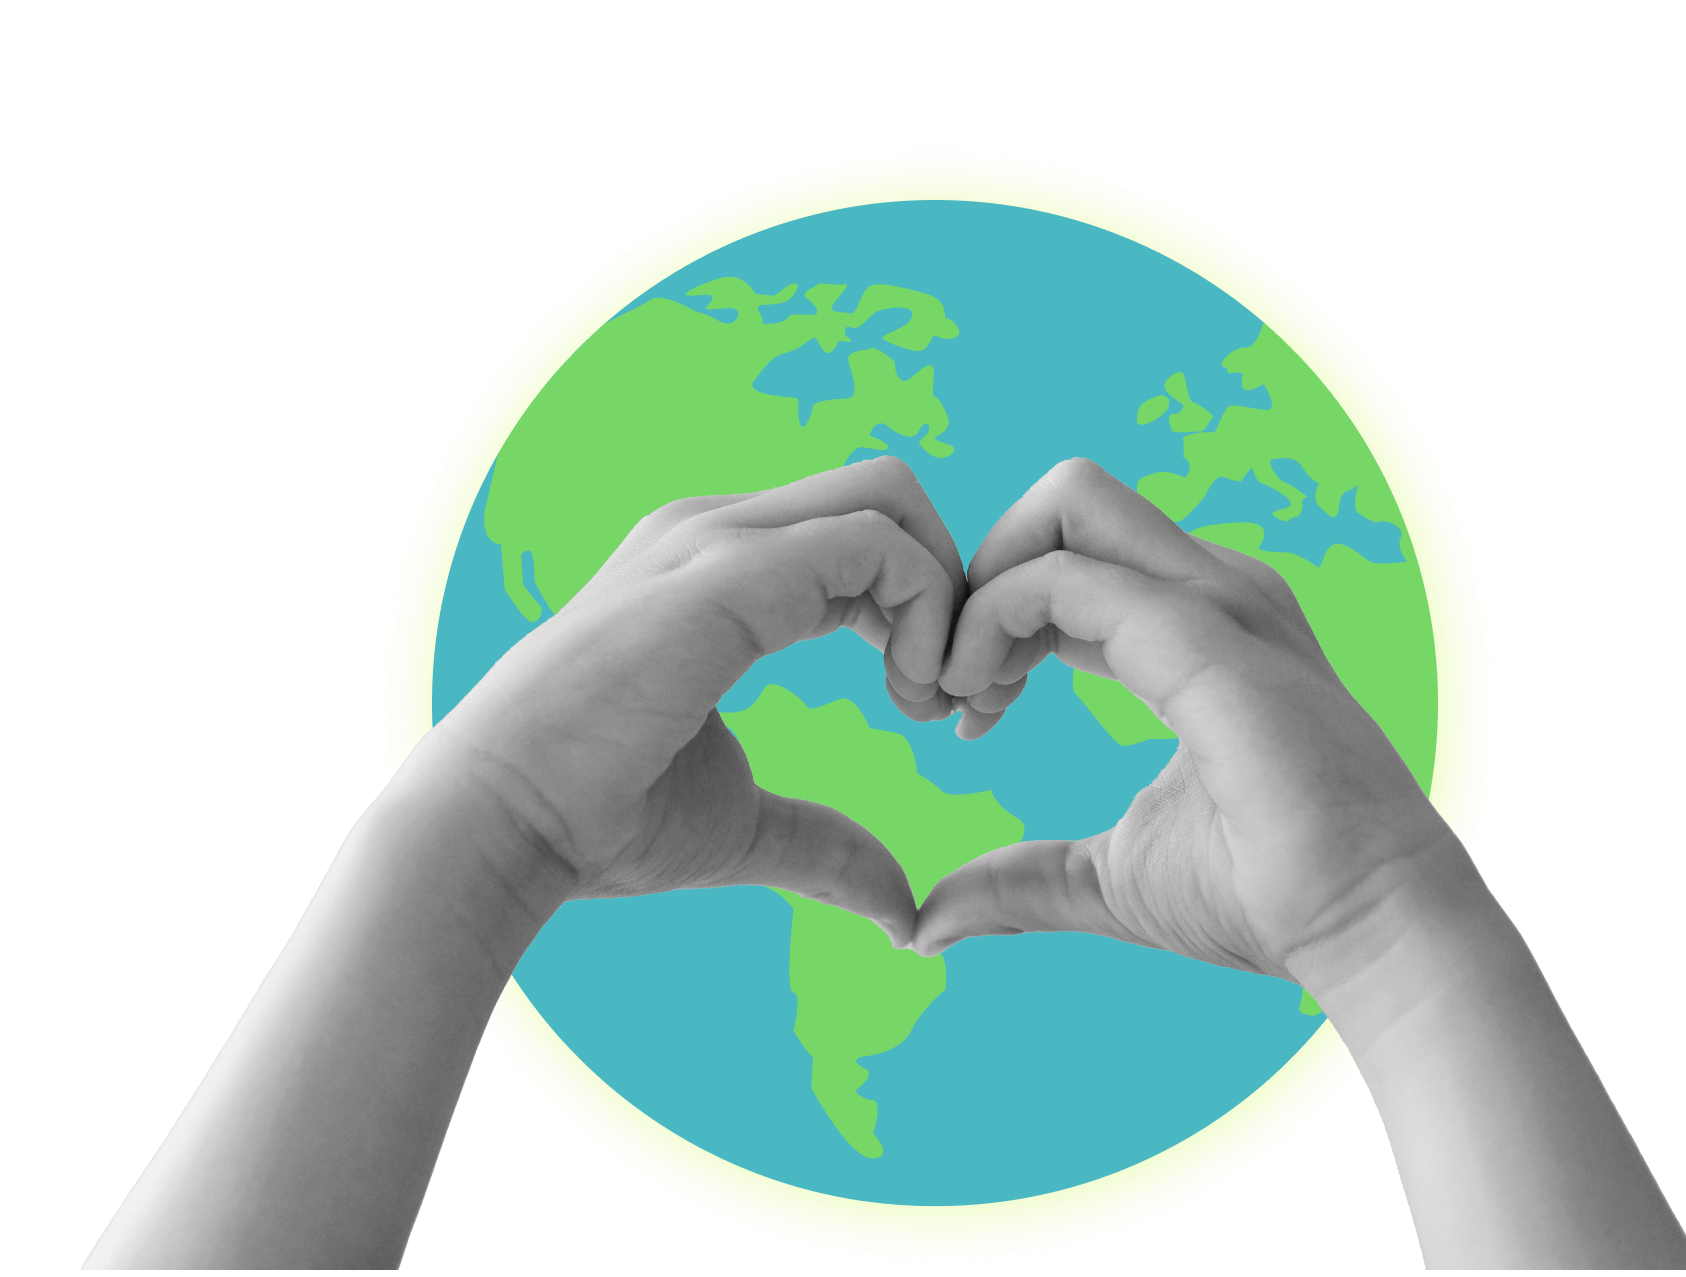 Two hands shown in black and white, making a heart shape in front of a blue and green image of planet earth